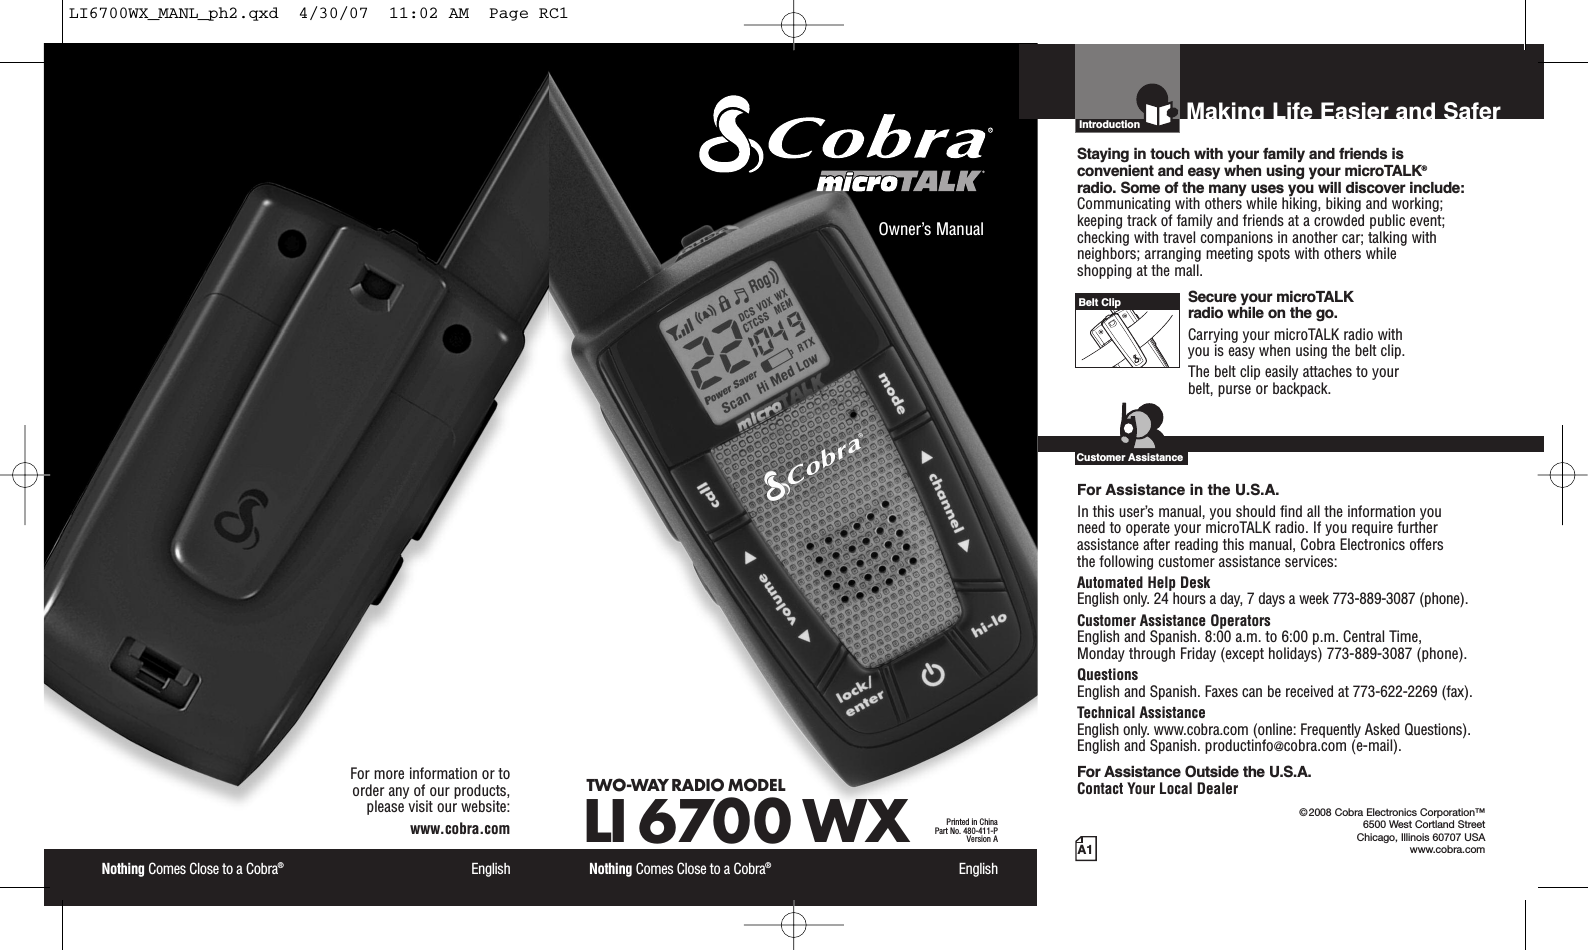 Nothing Comes Close to a Cobra®EnglishFor more information or to order any of our products, please visit our website:www.cobra.comA1Making Life Easier and SaferOwner’s ManualNothing Comes Close to a Cobra®EnglishTWO-WAY RADIO MODEL LI 6700 WXPrinted in ChinaPart No. 480-411-PVersion AIntro Operation CustomerAssistanceWarrantyNoticeMain IconsSecondary IconsIntroductionStaying in touch with your family and friends is convenient and easy when using your microTALK®radio. Some of the many uses you will discover include:Communicating with others while hiking, biking and working;keeping track of family and friends at a crowded public event;checking with travel companions in another car; talking withneighbors; arranging meeting spots with others while shopping at the mall.Secure your microTALK radio while on the go.Carrying your microTALK radio with you is easy when using the belt clip. The belt clip easily attaches to your belt, purse or backpack.For Assistance in the U.S.A. In this user’s manual, you should find all the information you need to operate your microTALK radio. If you requirefurtherassistance after reading this manual, Cobra Electronics offers the following customer assistance services:Automated Help Desk English only. 24 hours a day,7days a week 773-889-3087 (phone). Customer Assistance OperatorsEnglish and Spanish. 8:00 a.m. to 6:00 p.m. Central Time, Monday through Friday (except holidays) 773-889-3087 (phone). QuestionsEnglish and Spanish. Faxes can be received at 773-622-2269 (fax). Technical AssistanceEnglish only. www.cobra.com (online: Frequently Asked Questions). English and Spanish. productinfo@cobra.com (e-mail).For Assistance Outside the U.S.A. Contact Your Local DealerIntro Operation CustomerAssistanceWarrantyNoticeMain IconsSecondary Icons©2008 Cobra Electronics Corporation™6500 West Cortland StreetChicago, Illinois 60707 USAwww.cobra.comCustomer AssistanceBelt ClipLI6700WX_MANL_ph2.qxd  4/30/07  11:02 AM  Page RC1